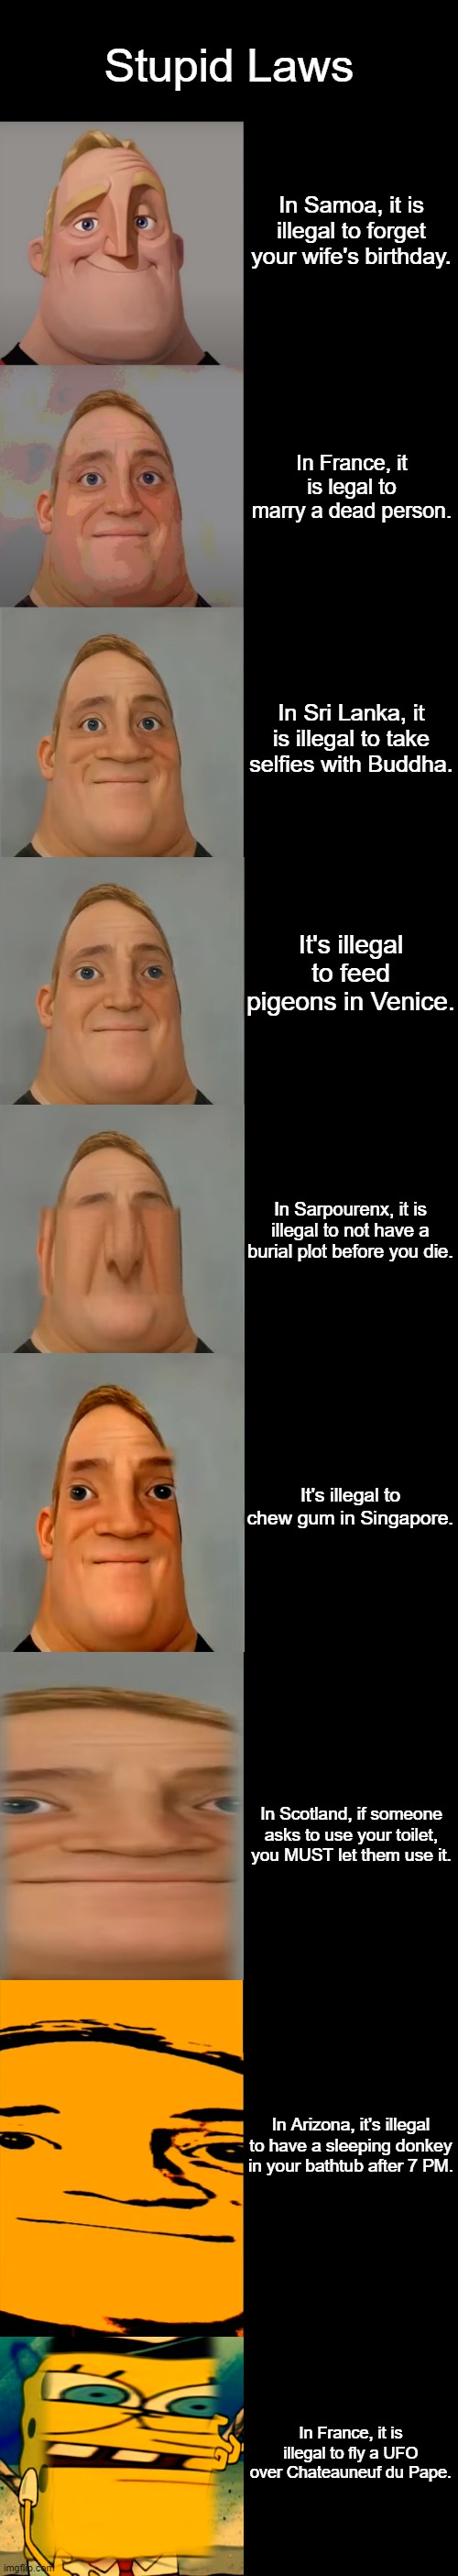 Mr Incredible becoming Idiot template | Stupid Laws; In Samoa, it is illegal to forget your wife's birthday. In France, it is legal to marry a dead person. In Sri Lanka, it is illegal to take selfies with Buddha. It's illegal to feed pigeons in Venice. In Sarpourenx, it is illegal to not have a burial plot before you die. It's illegal to chew gum in Singapore. In Scotland, if someone asks to use your toilet, you MUST let them use it. In Arizona, it's illegal to have a sleeping donkey in your bathtub after 7 PM. In France, it is illegal to fly a UFO over Chateauneuf du Pape. | image tagged in mr incredible becoming idiot template | made w/ Imgflip meme maker